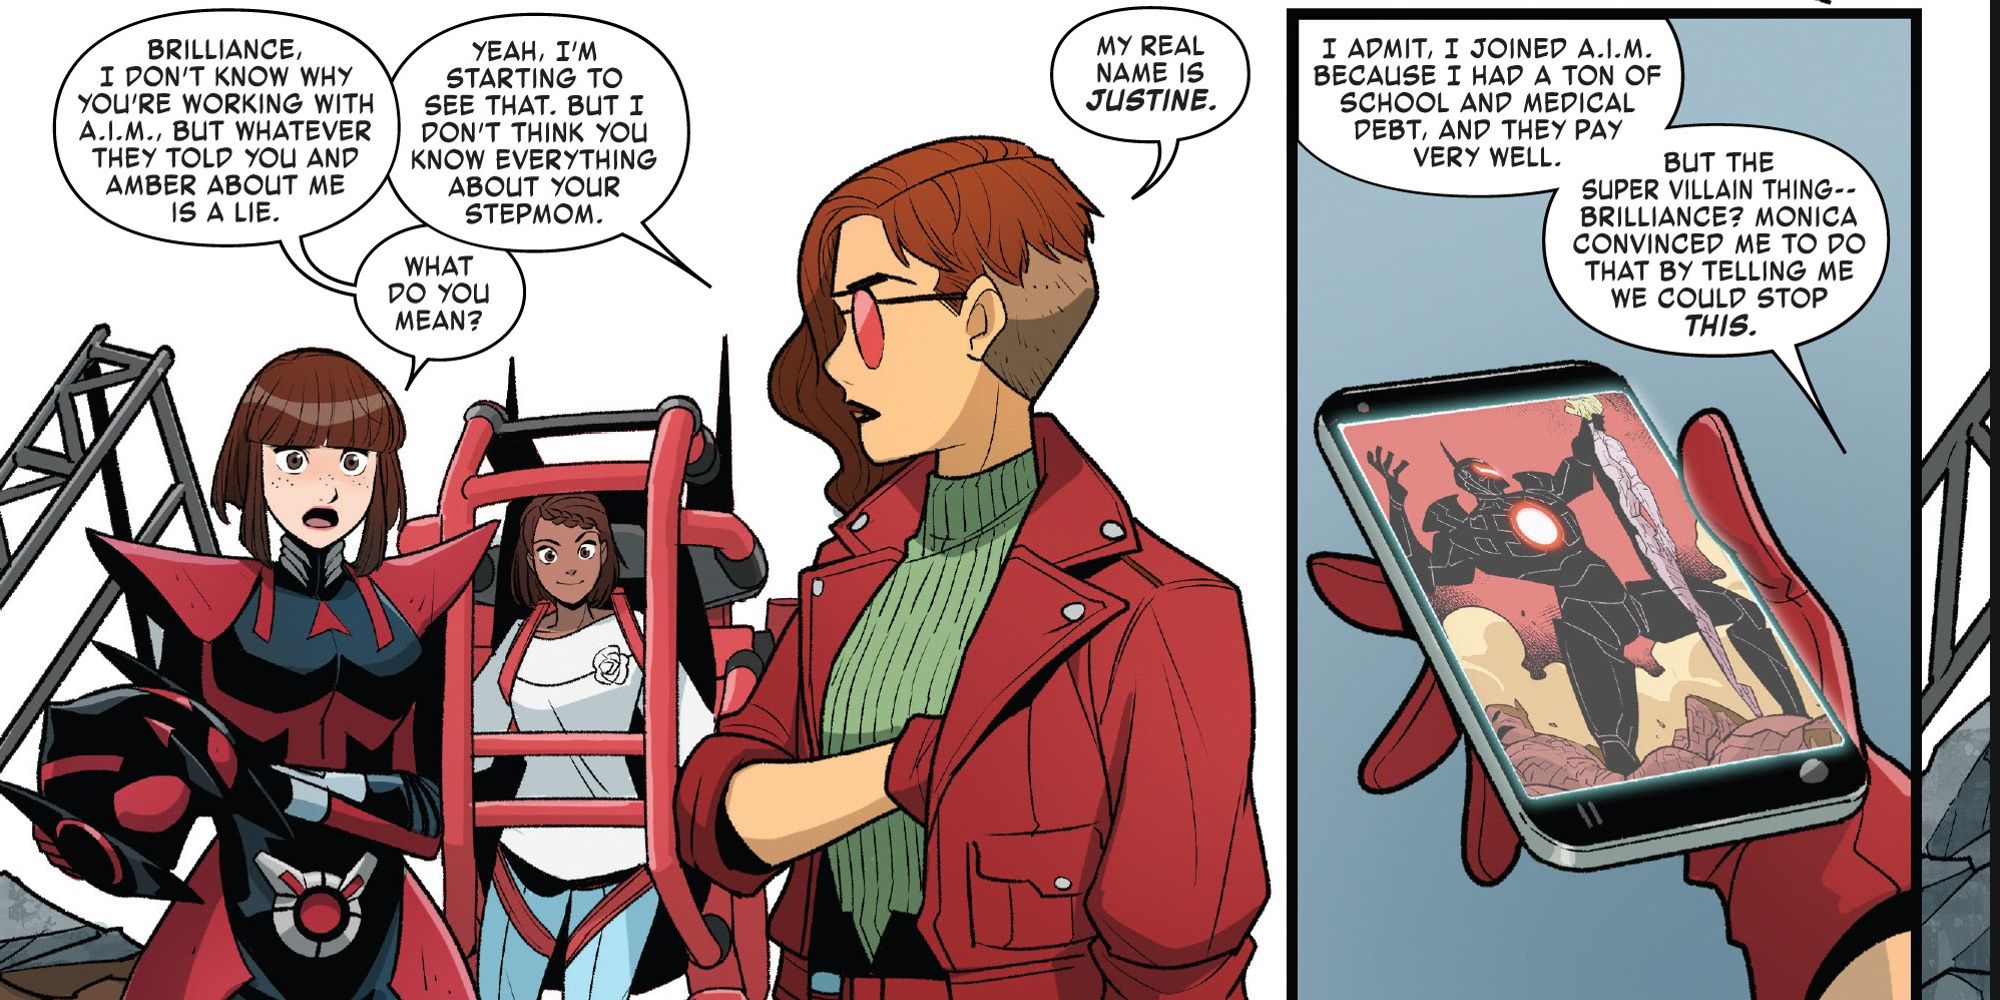 Justine AKA Brilliance introducing herself to the Wasp in The Unstoppable Wasp 10